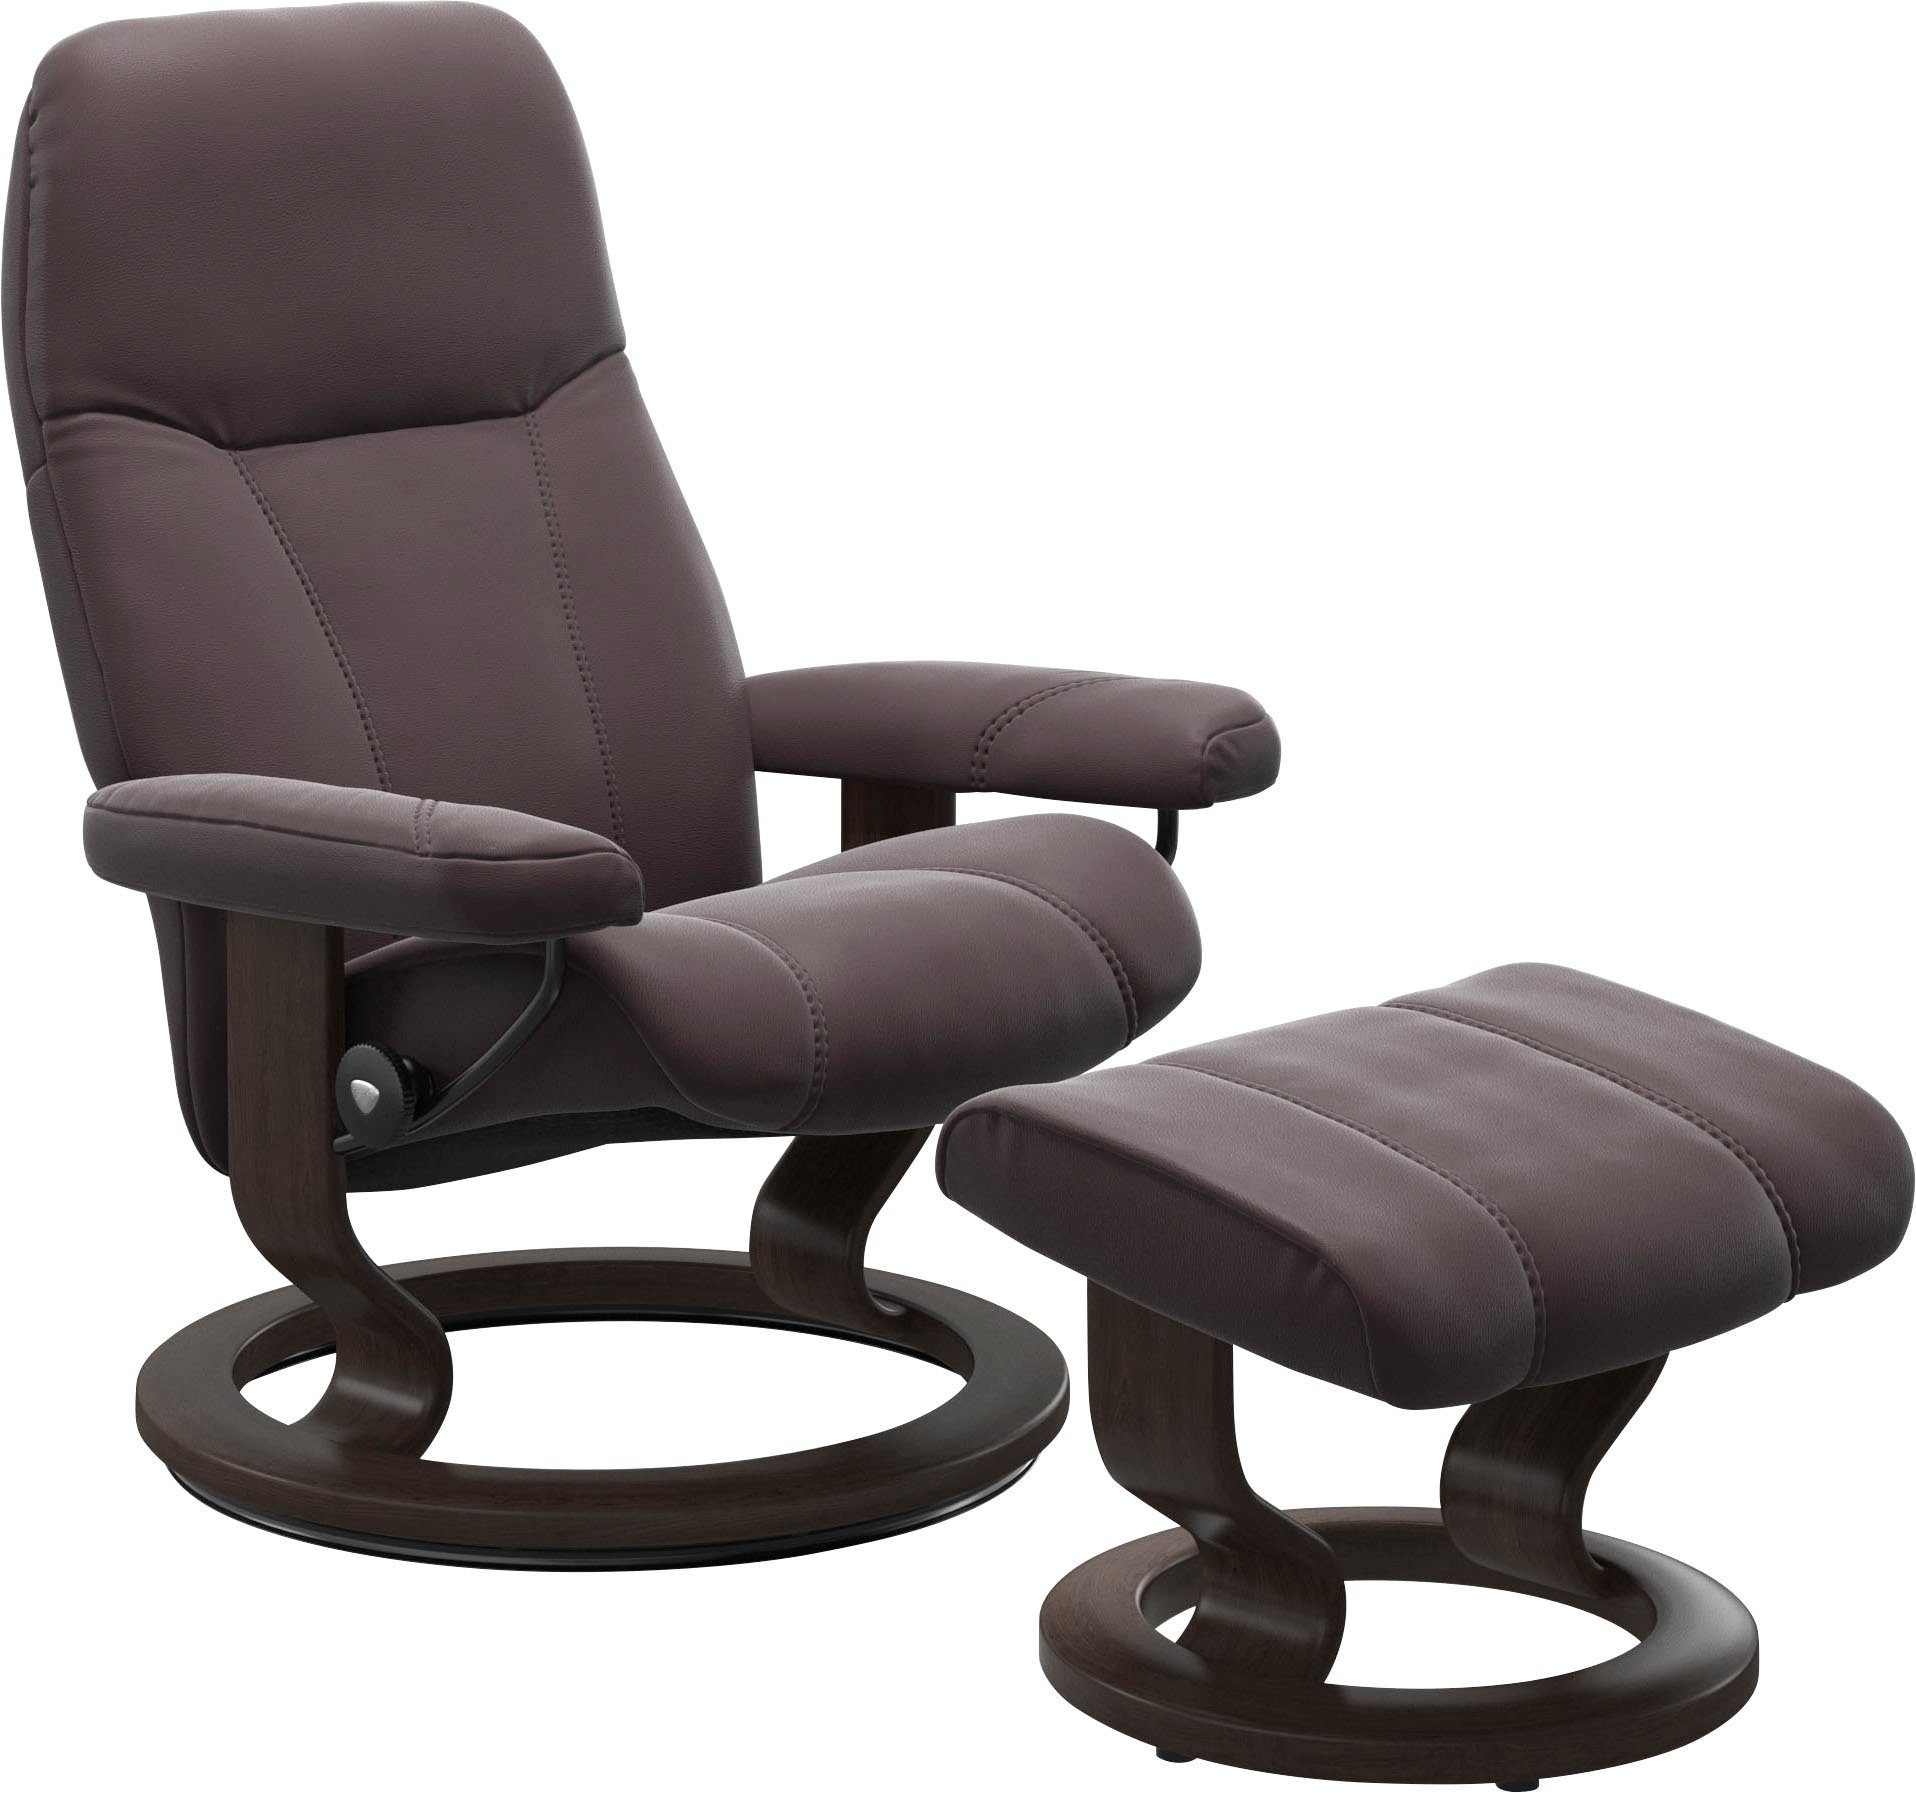 Stressless® Relaxsessel Consul, mit Classic Base, Größe S, Gestell Wenge | Funktionssessel